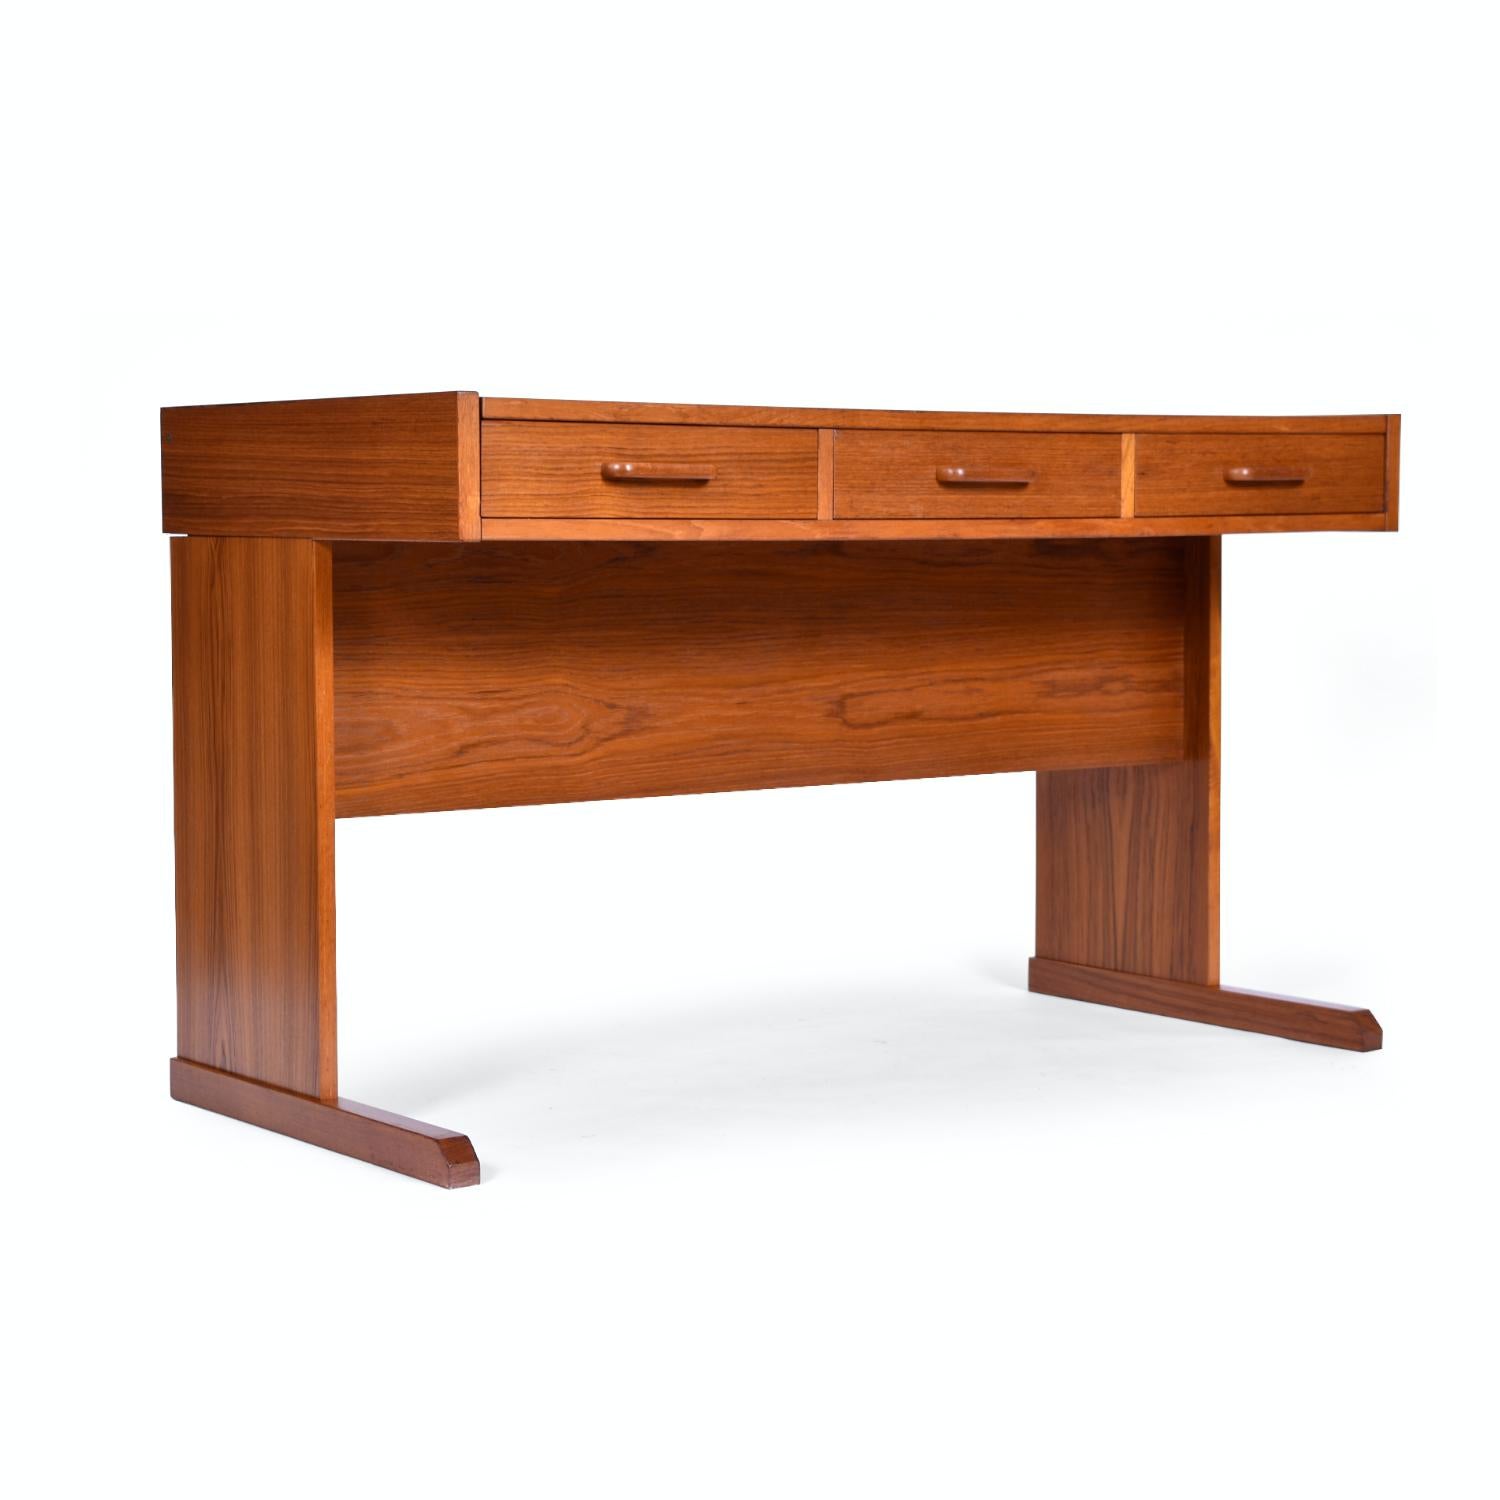 Restored vintage Danish teak desk by Vi-Ma. The unassuming desk holds a very clever secret. Slide the table top to reveal a filing cabinet space. The standard size filing cabinet is the perfect space saving solution for your home office. Watch our